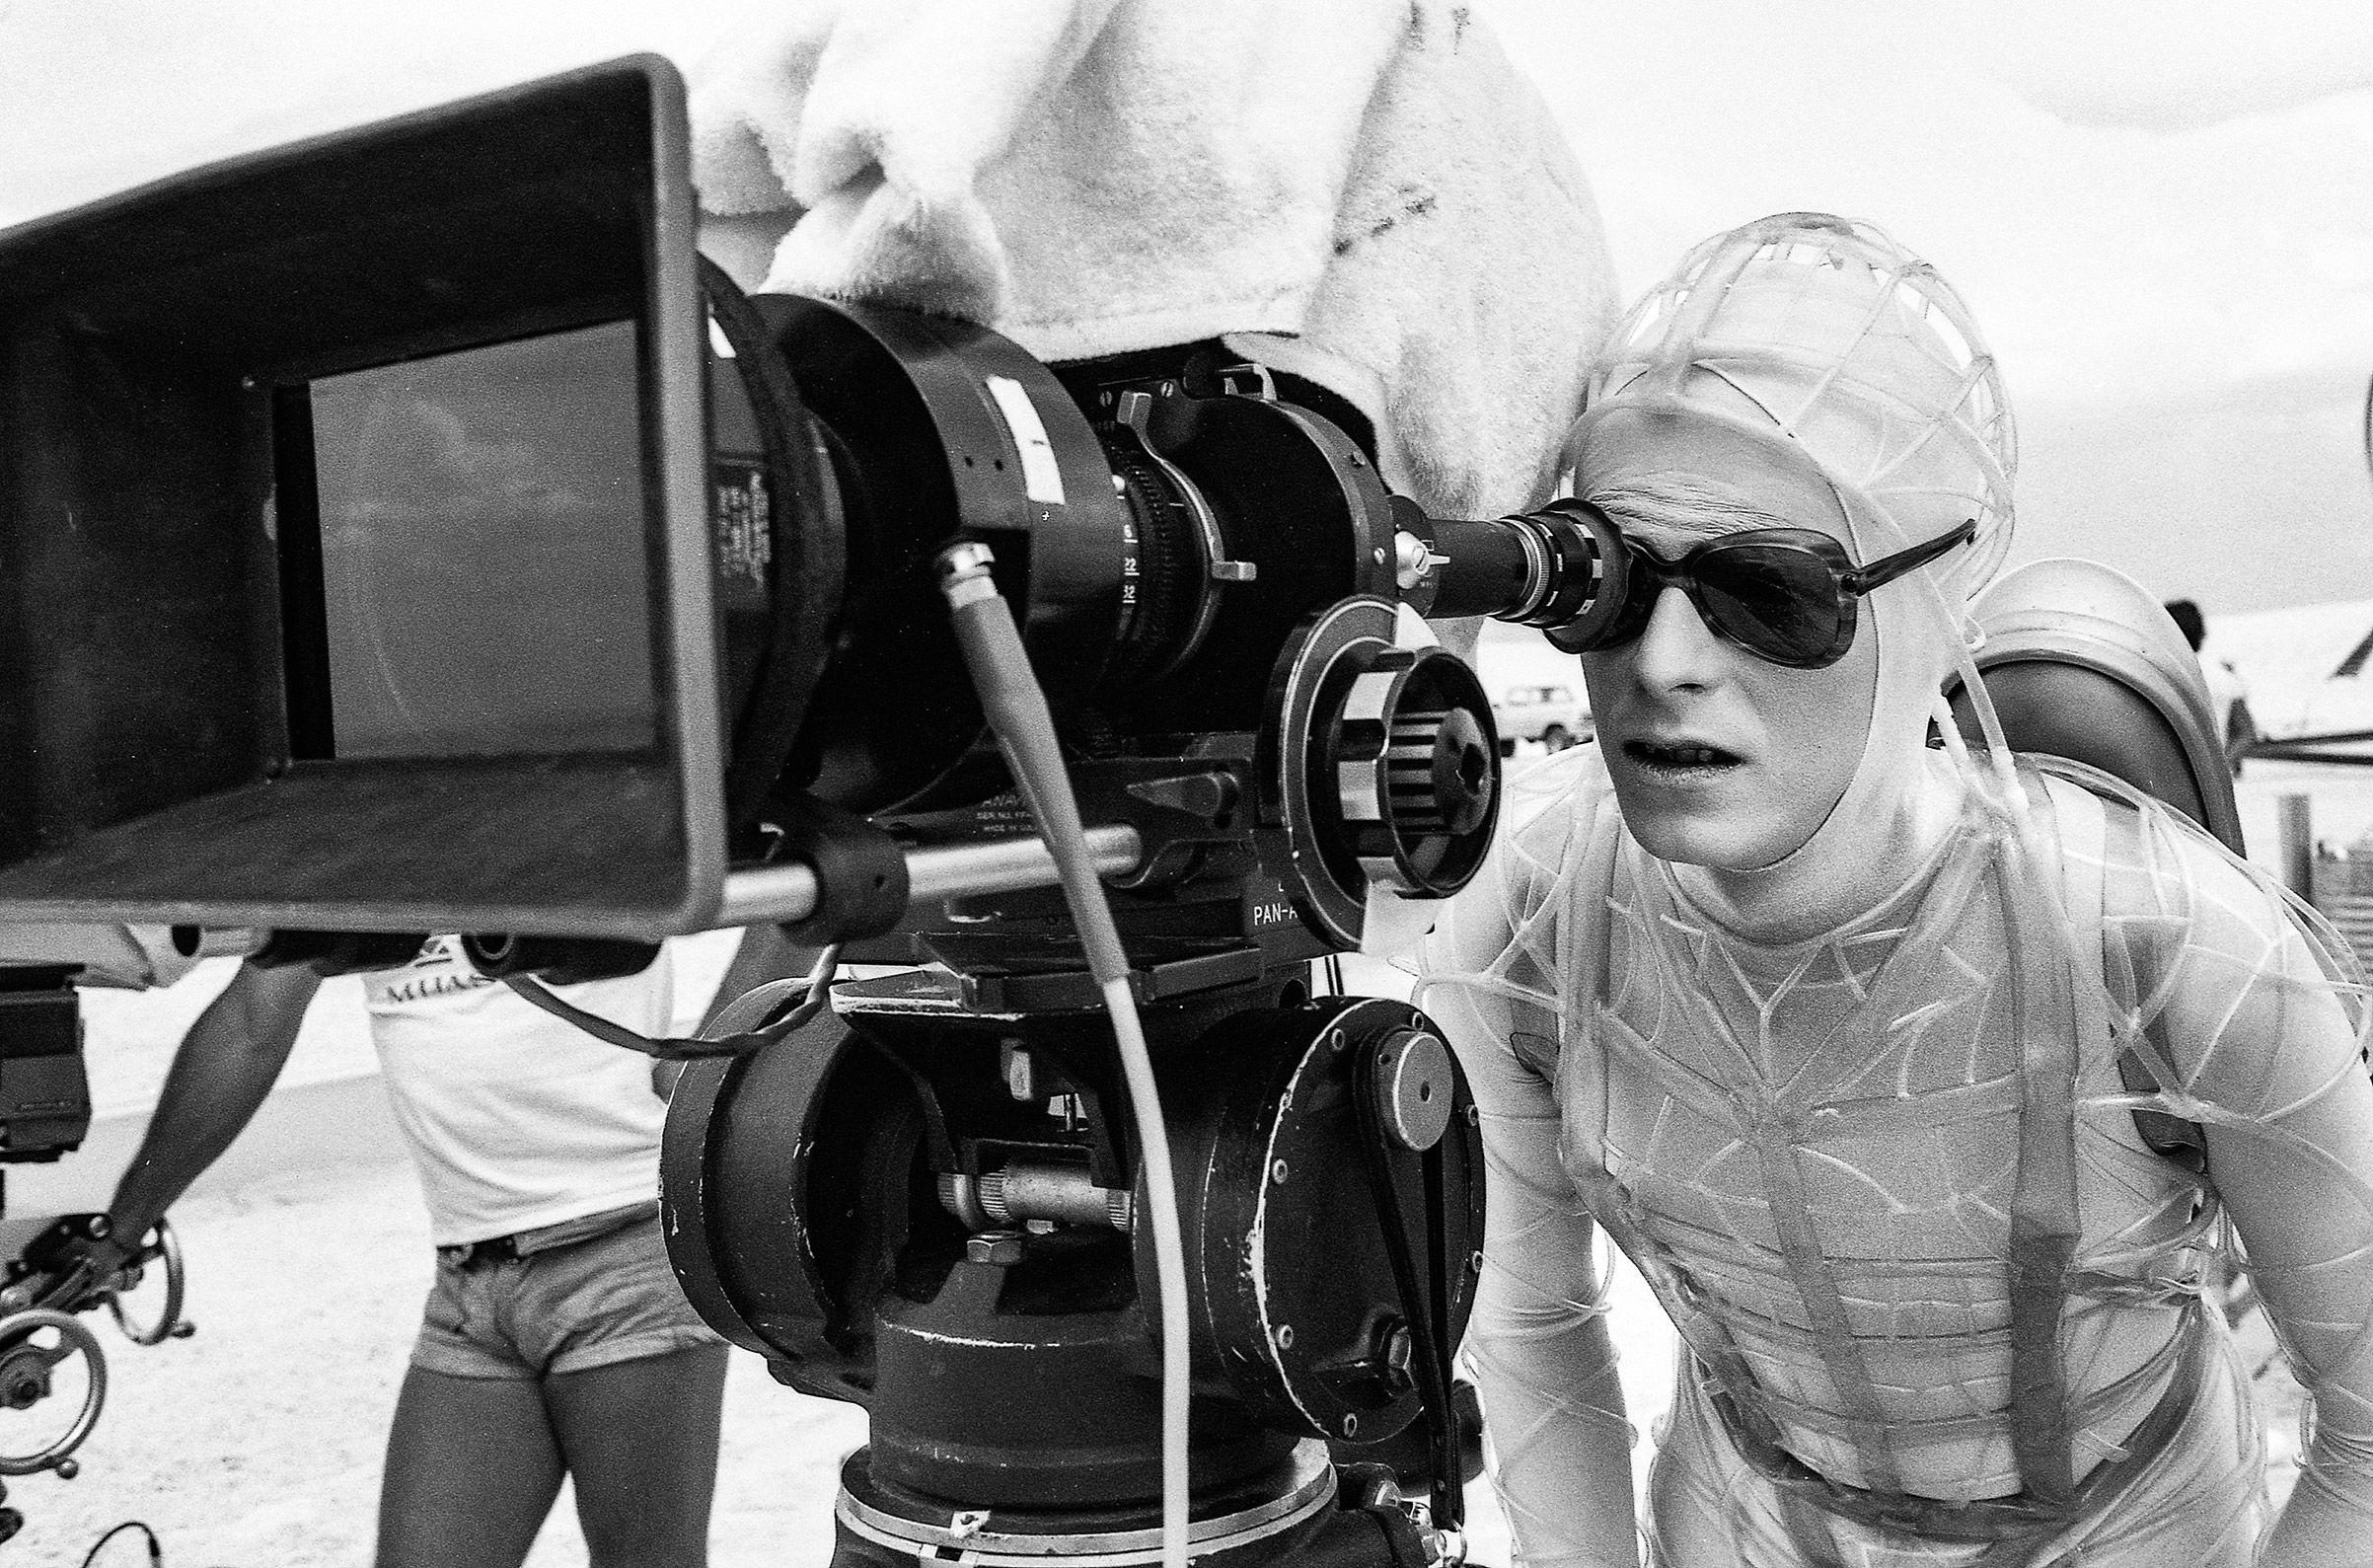 Behind the scenes of the 1976 Nic Roeg film 'The Man Who Fell To Earth' starring David Bowie.